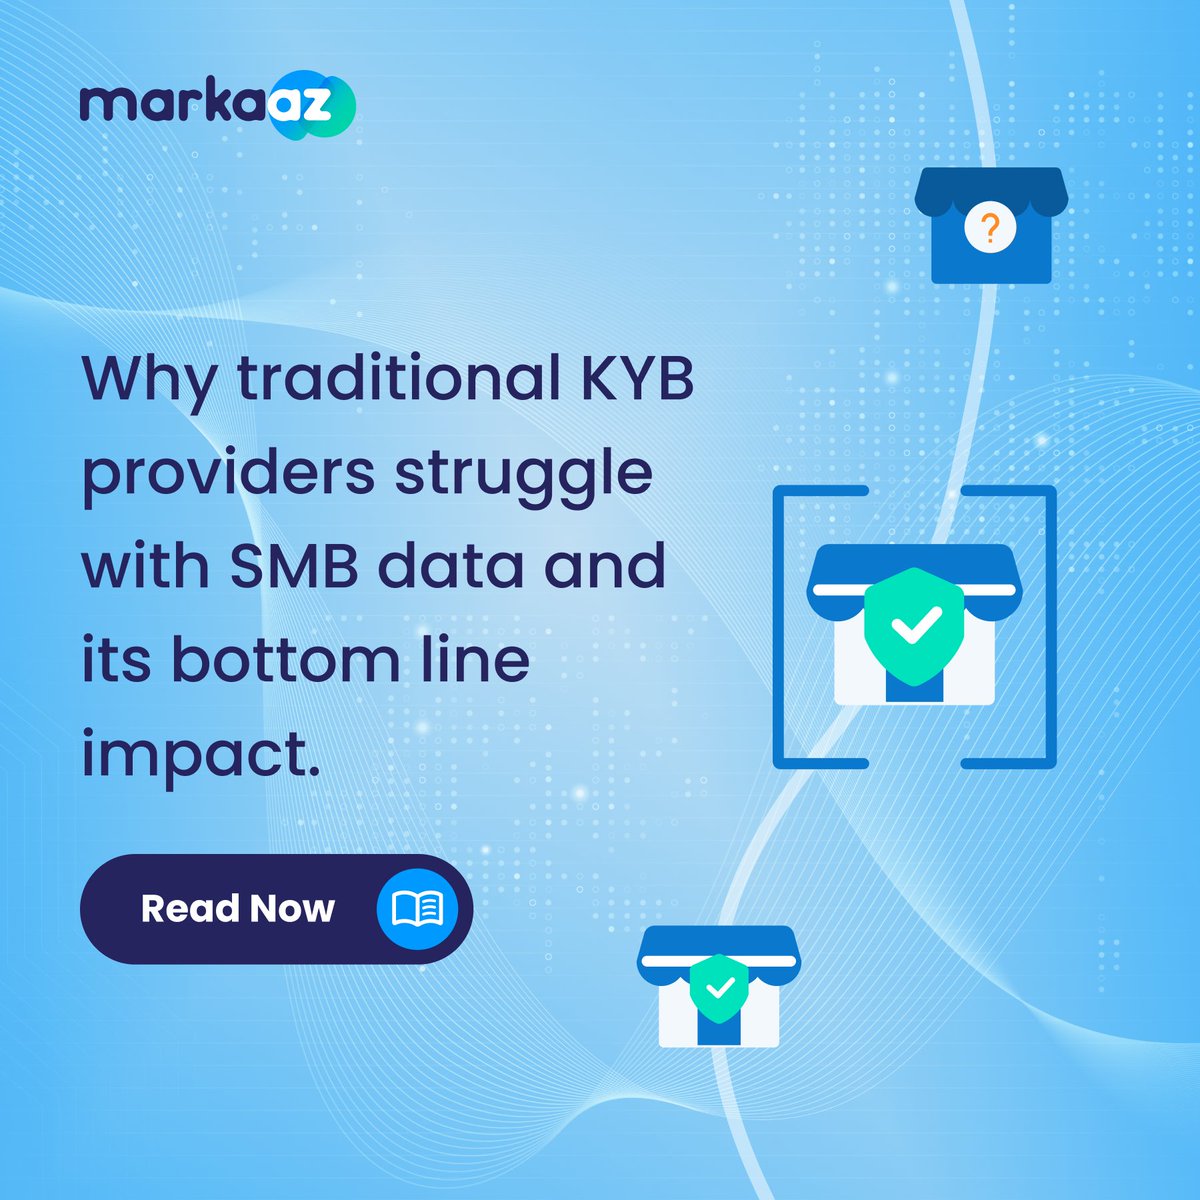 Accurate #businessverification is critical for companies looking to grow while adhering to regulatory standards. Our recent blog dives into the challenges and solutions for enhancing #SMB verification. Read more: bit.ly/3tUPLVR

 #KYB #AML #CDD